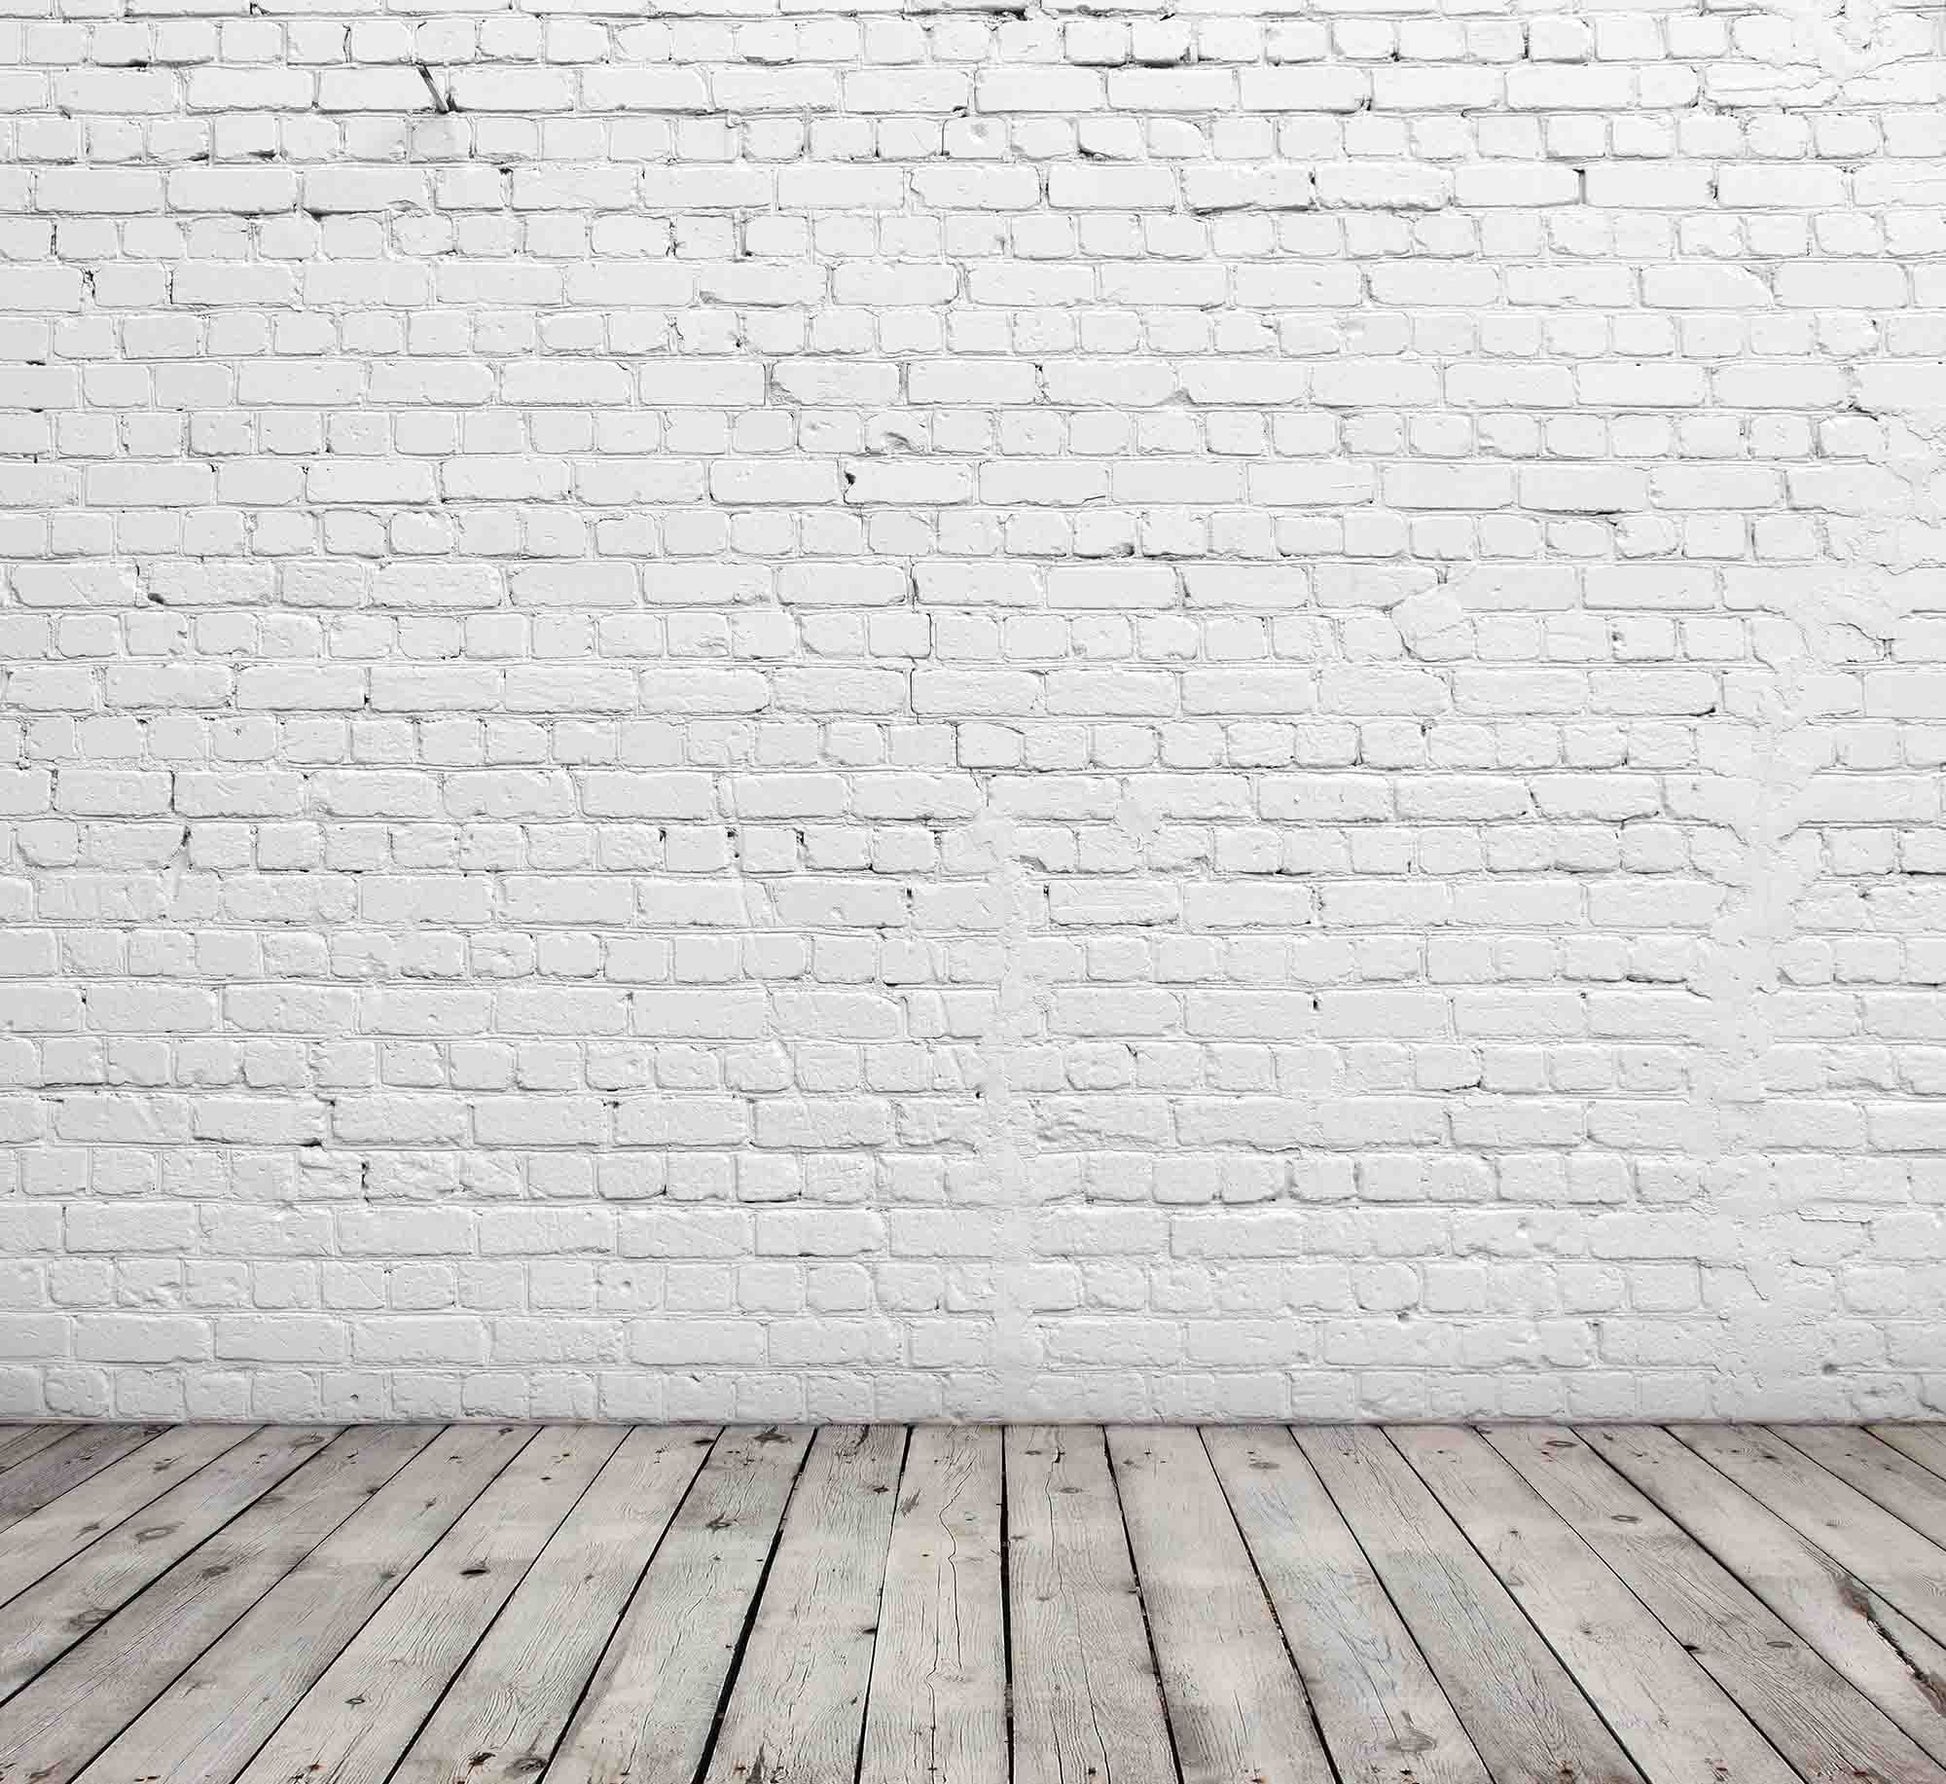 Senior White Stucco Brick Wall With Old Wood Floor Texture Photography Backdrop Shopbackdrop